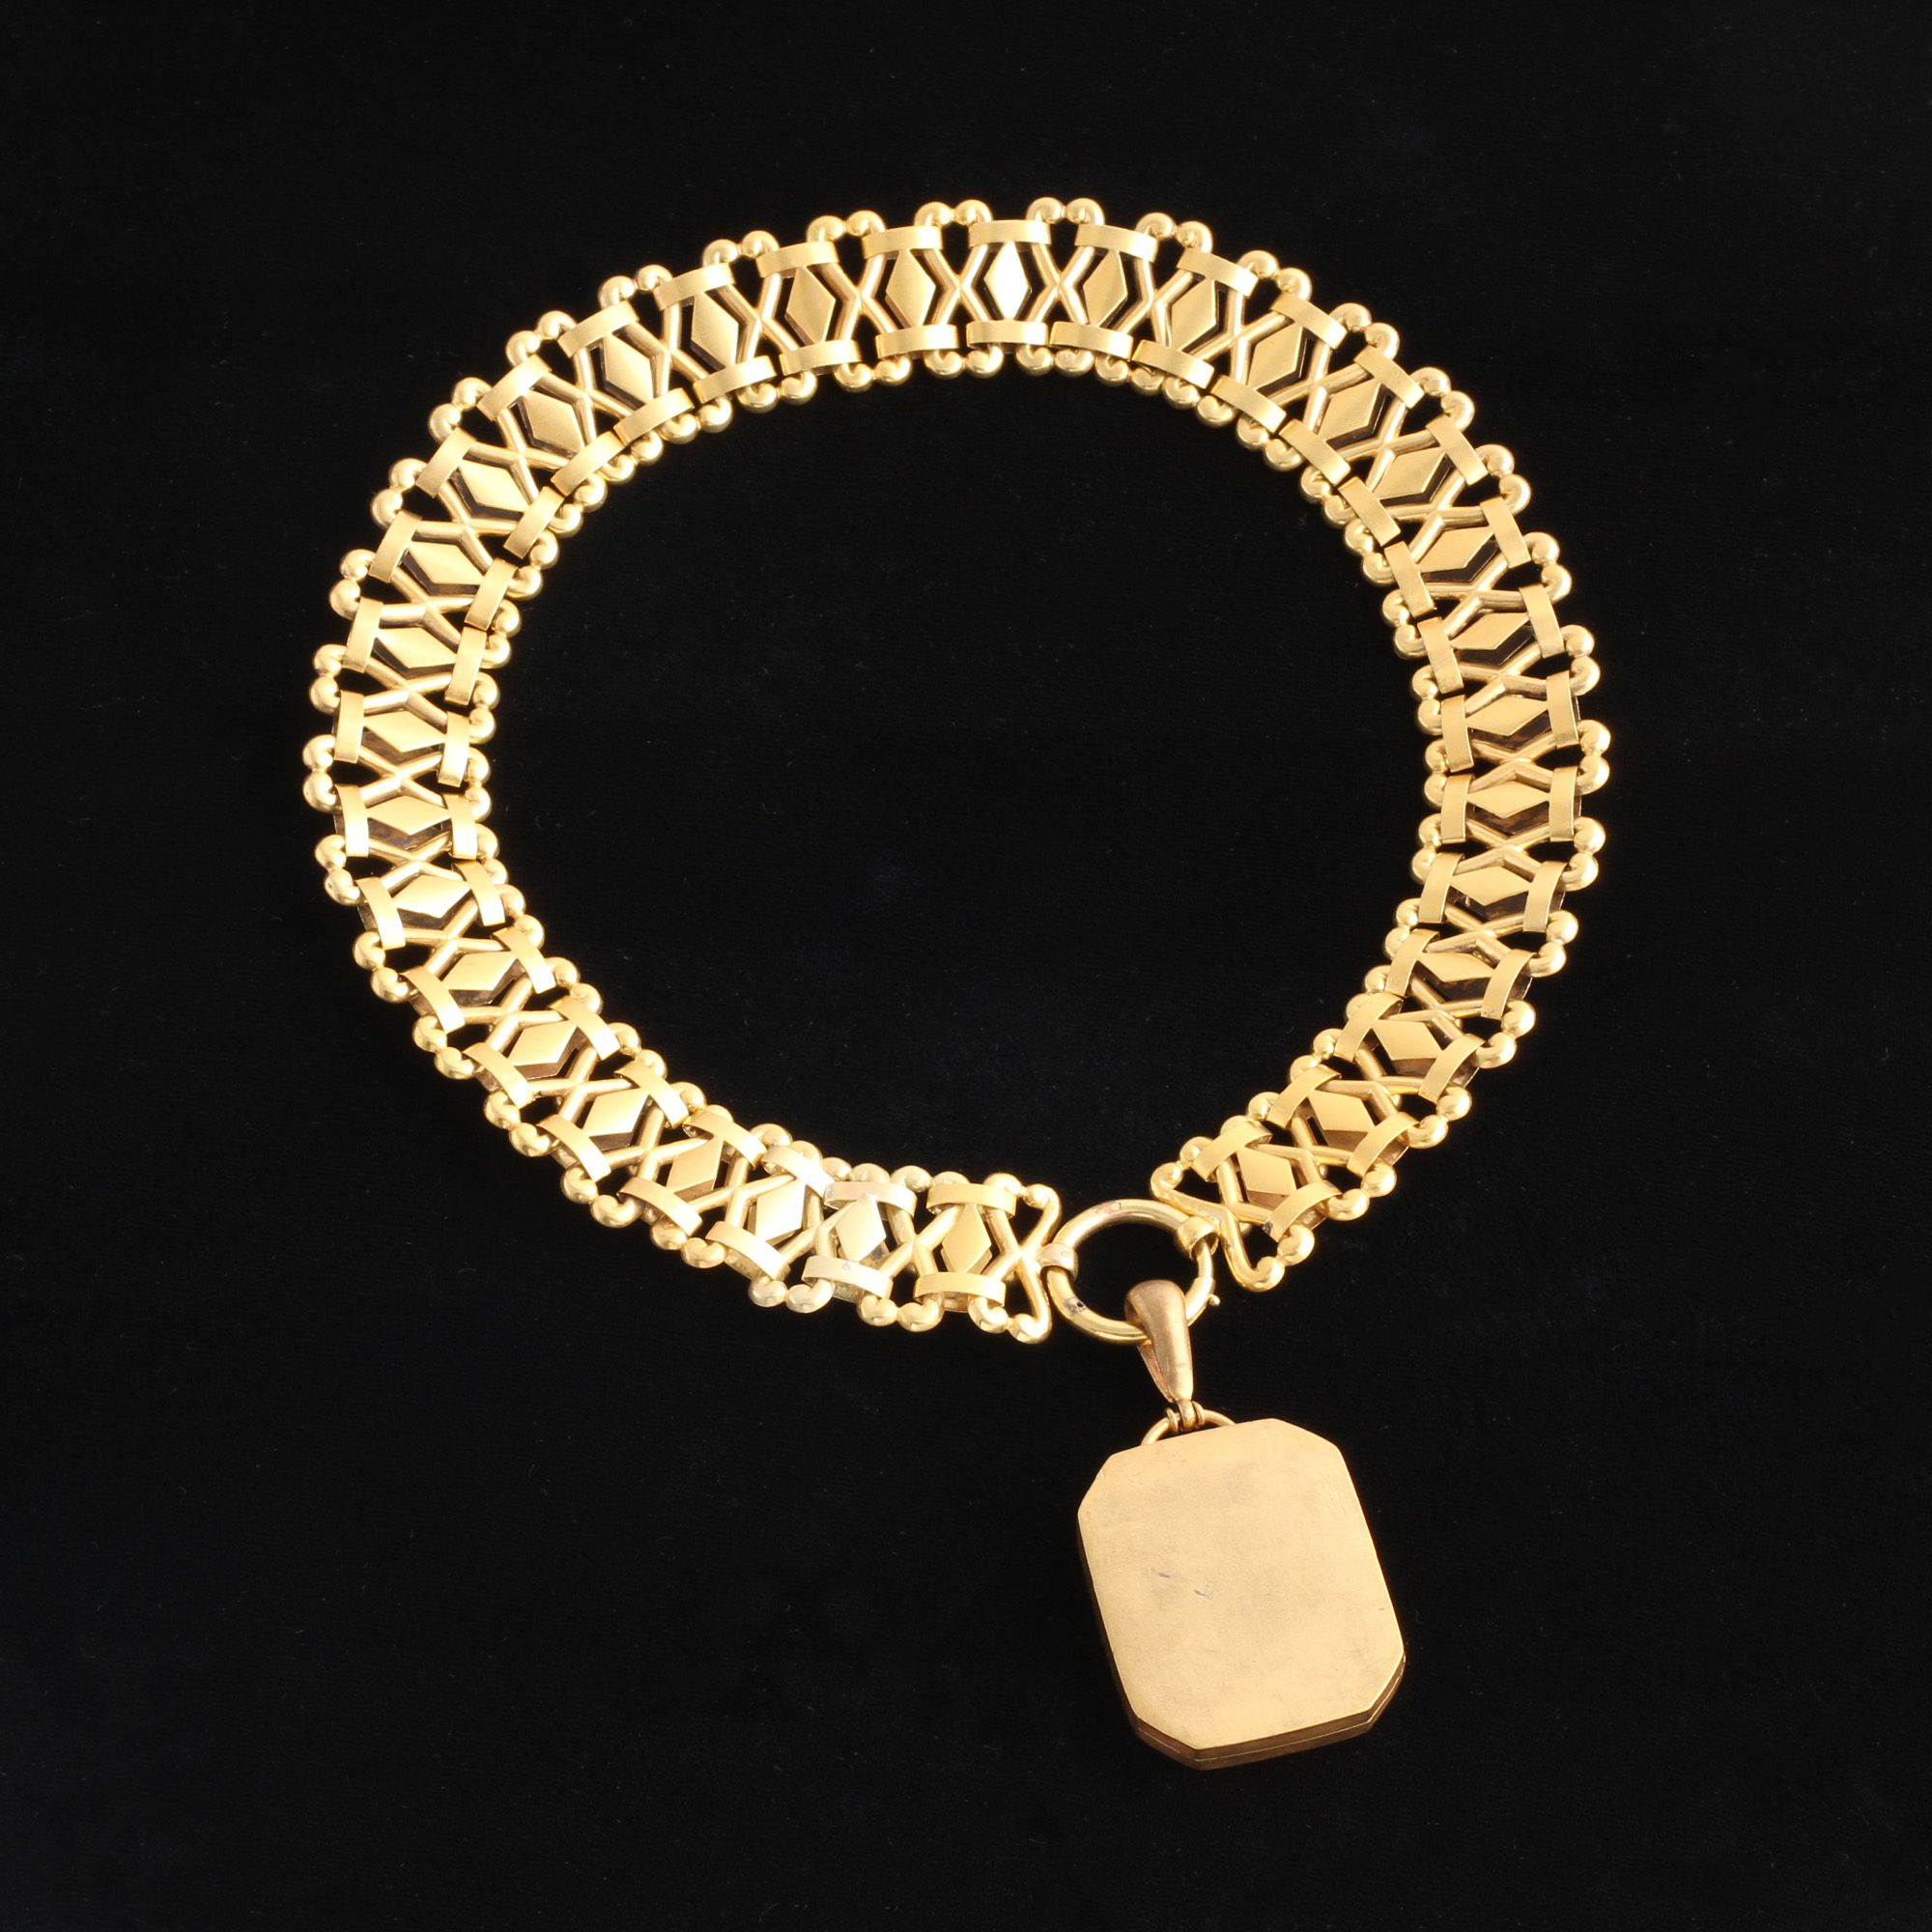 Aesthetic Movement Collar with Locket